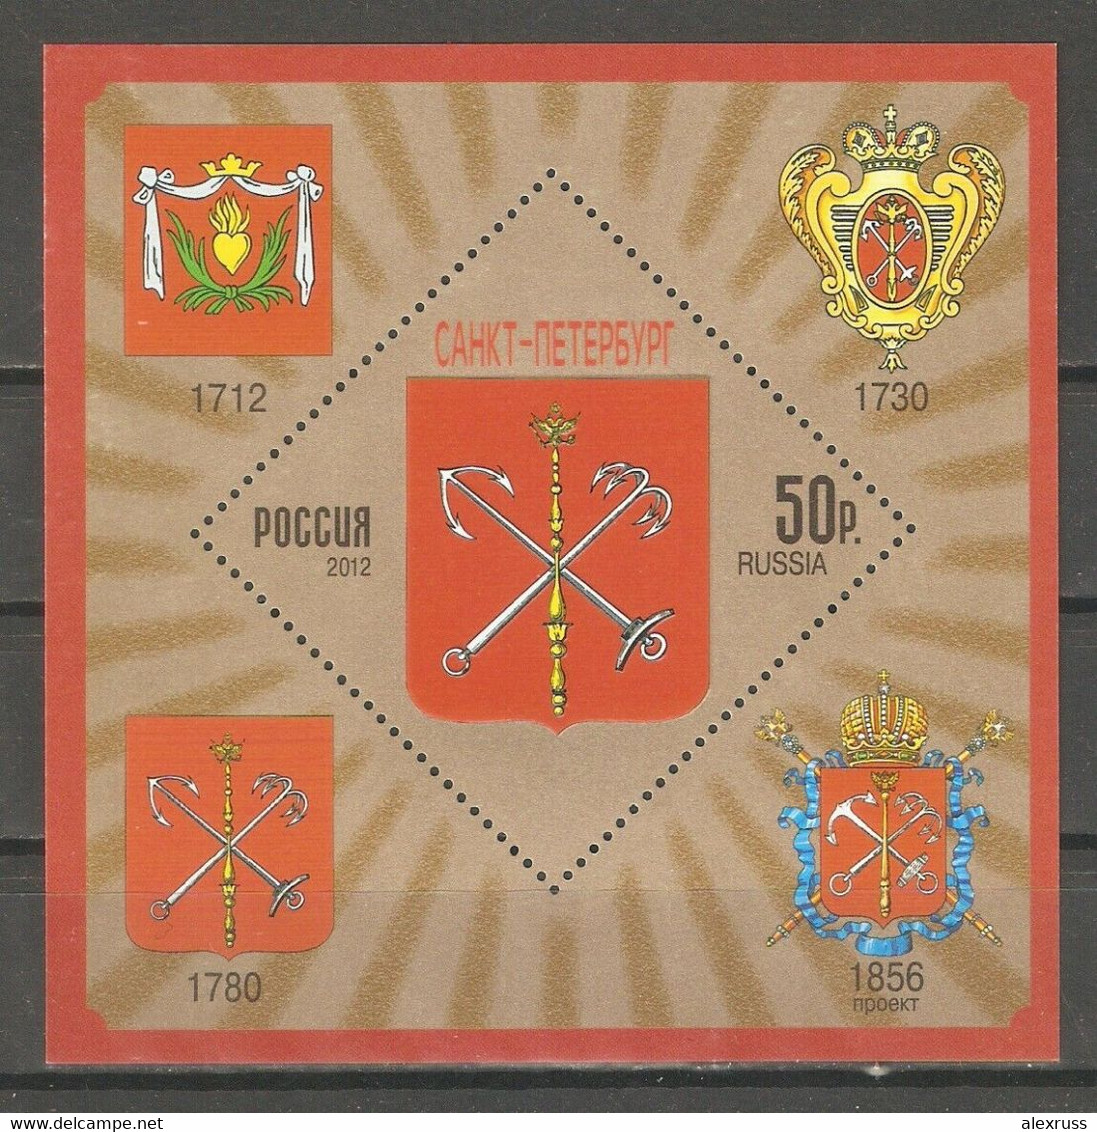 RUSSIA 2012,S/S Heraldic Coat Of Arms Of Saint Petersburg, At Different Time Periods, Embossed, Scott # 7417,VF MNH** - Unused Stamps